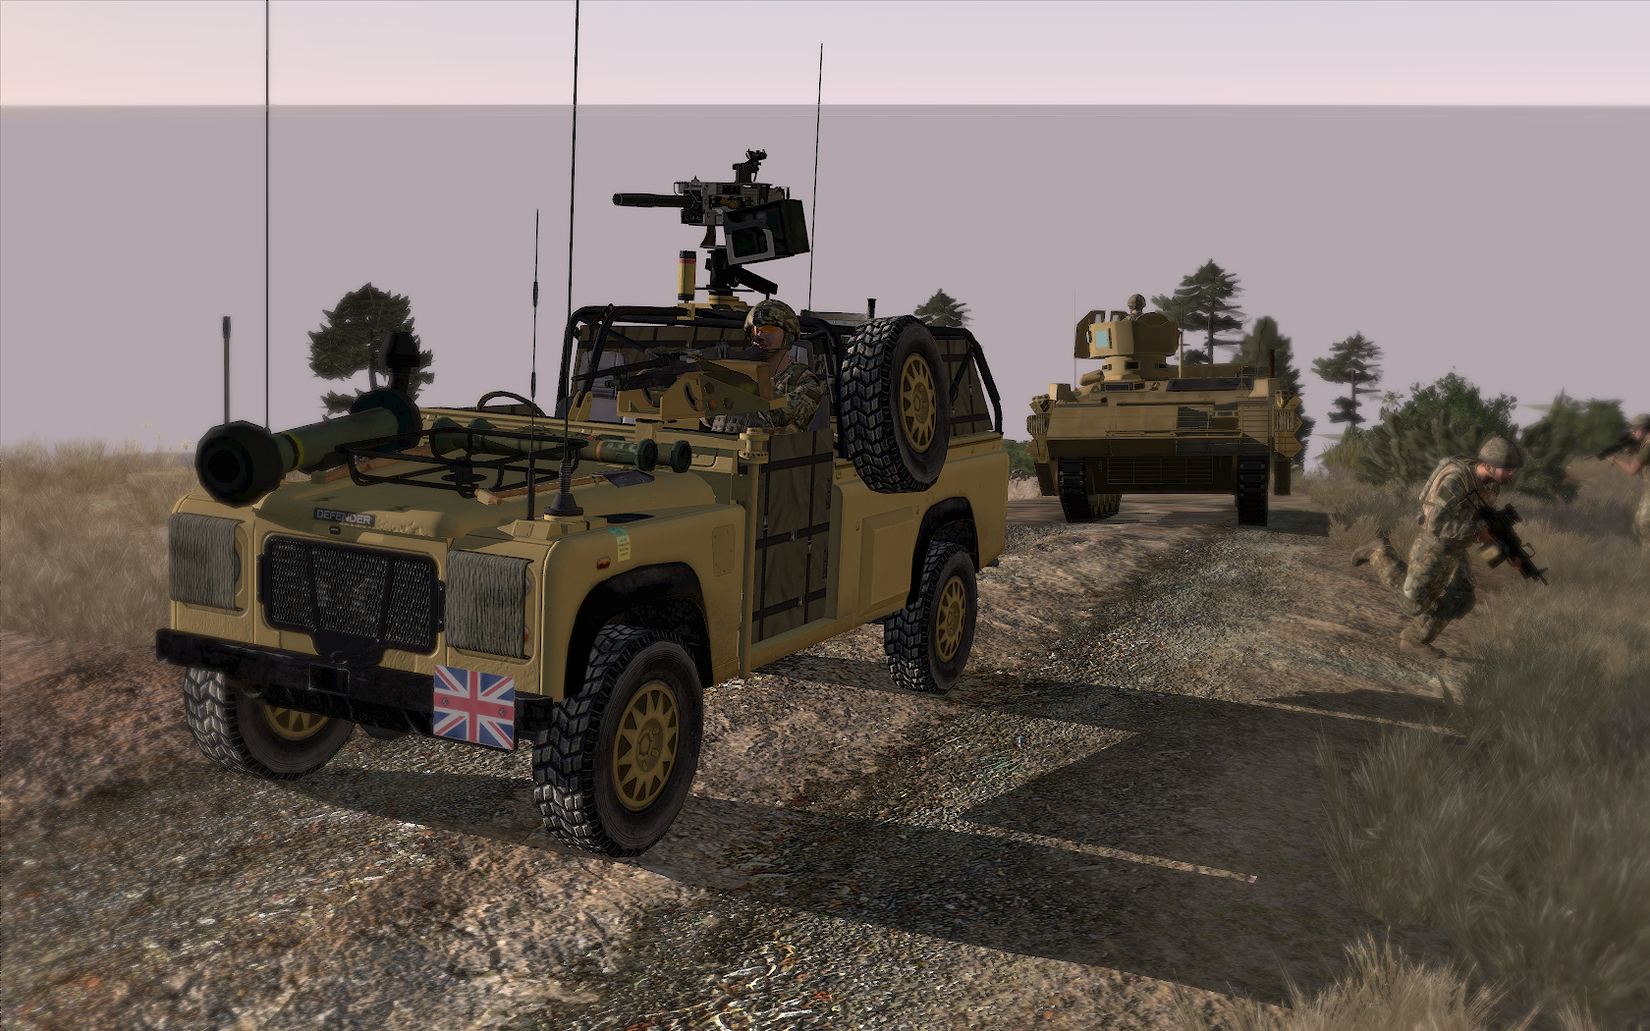 simhq-serious-sunday-arma-2-2-24-2013-simhq-forums